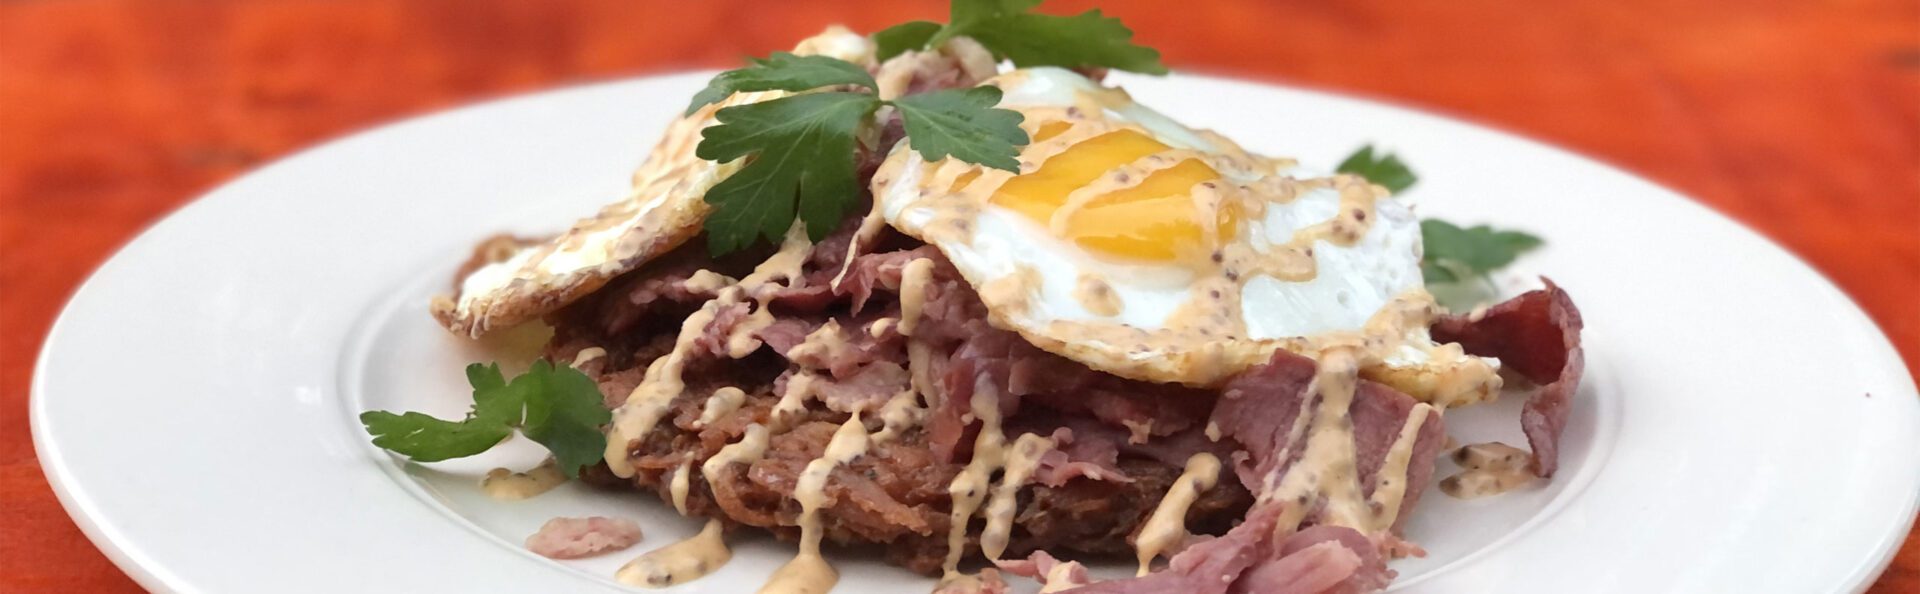 A plate of food with meat and an egg on top.